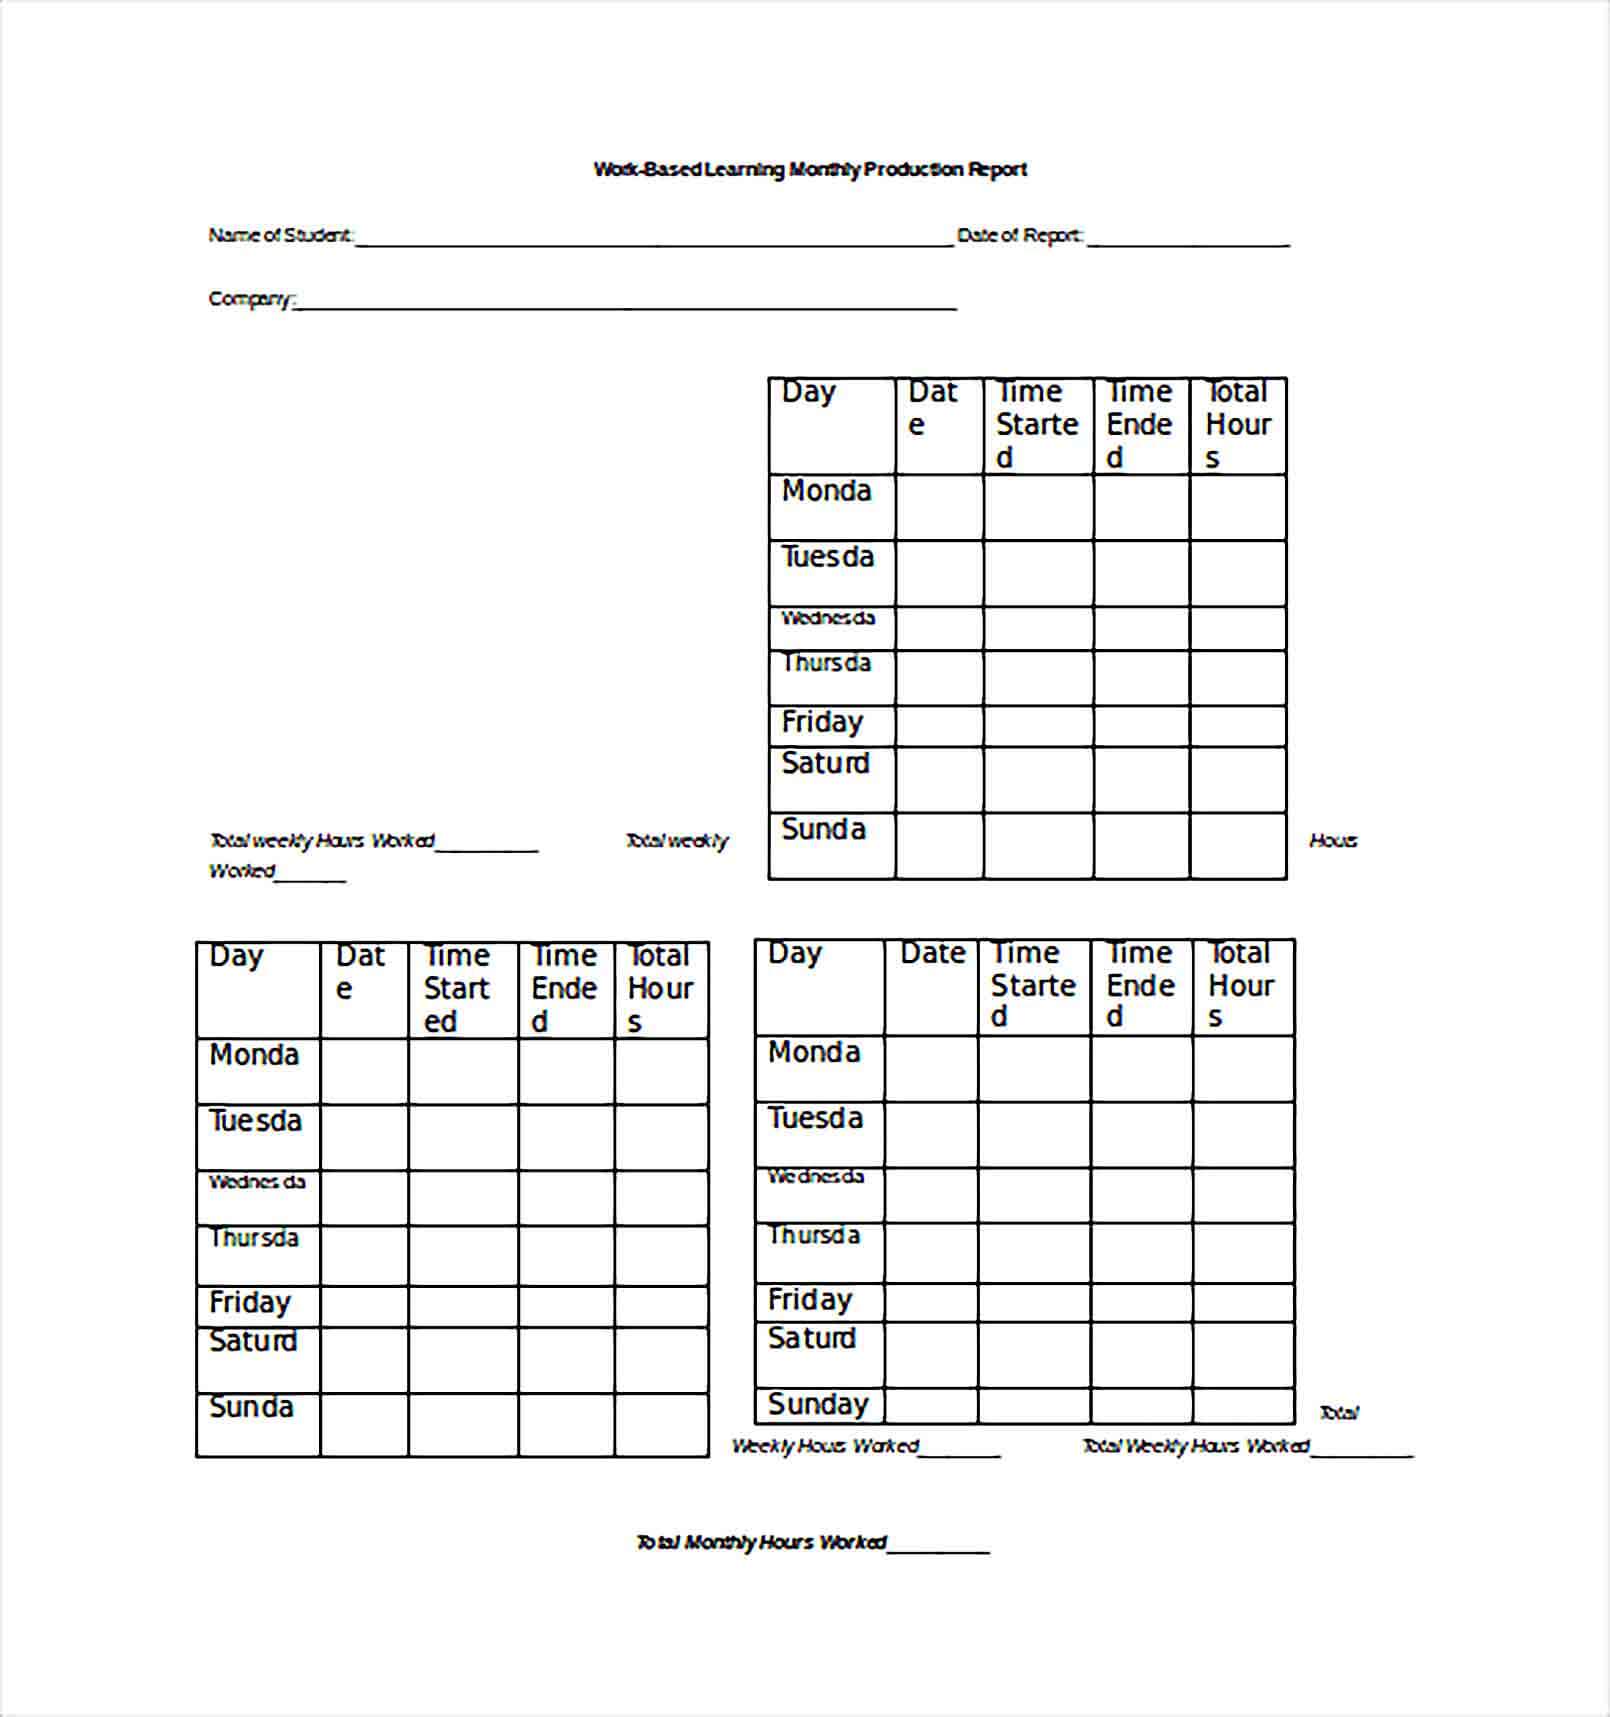 Sample Monthly Production Report Word Template